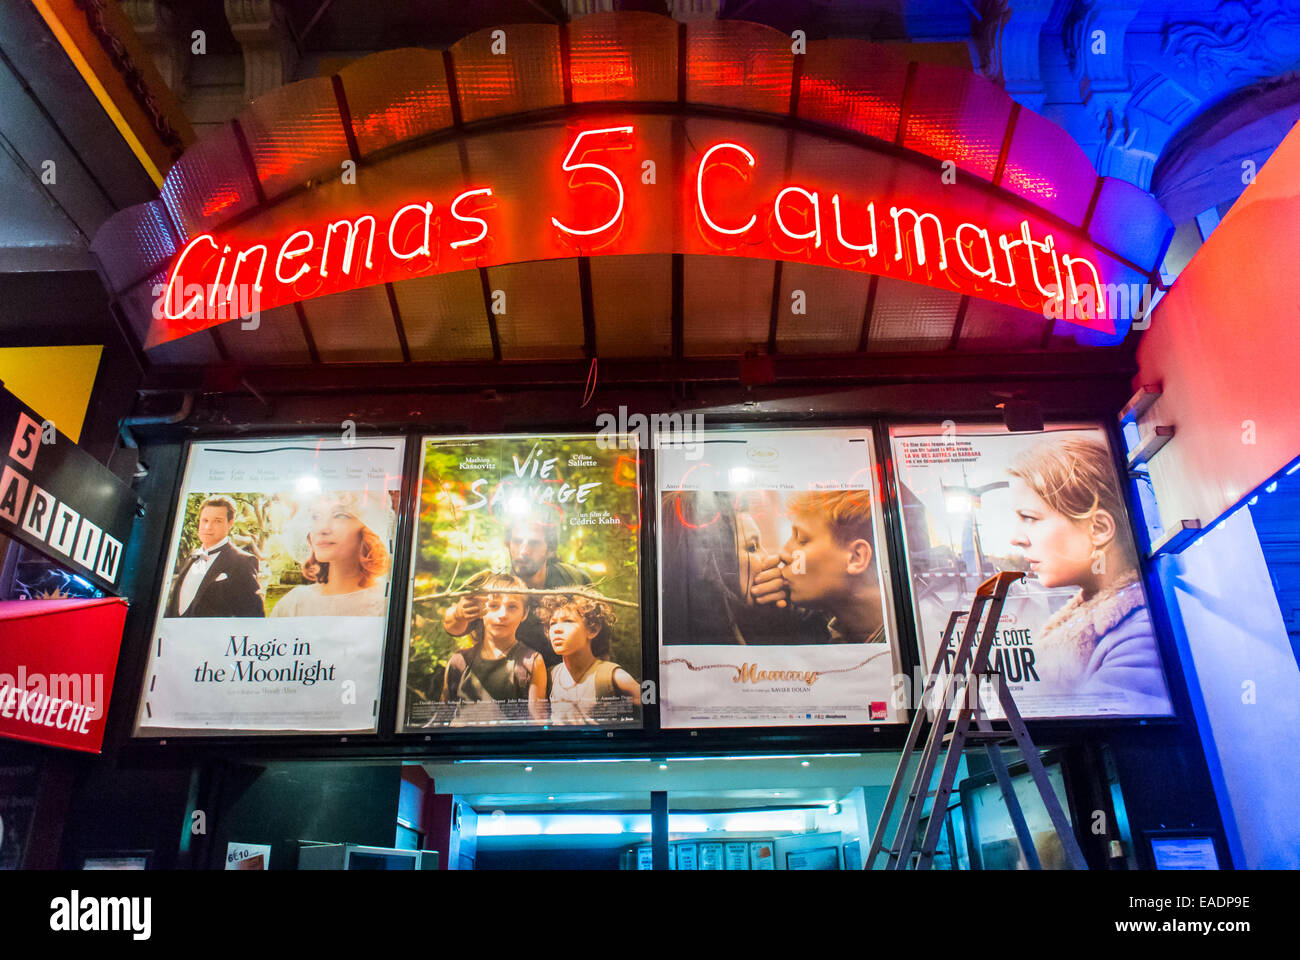 Paris, France, Front, French Independent Cinema Movies, Theater, Neon Lights at Night, '5 Caumartin'  with Movie Posters, vintage cinema sign, movie theater marquee, film movie sign Stock Photo